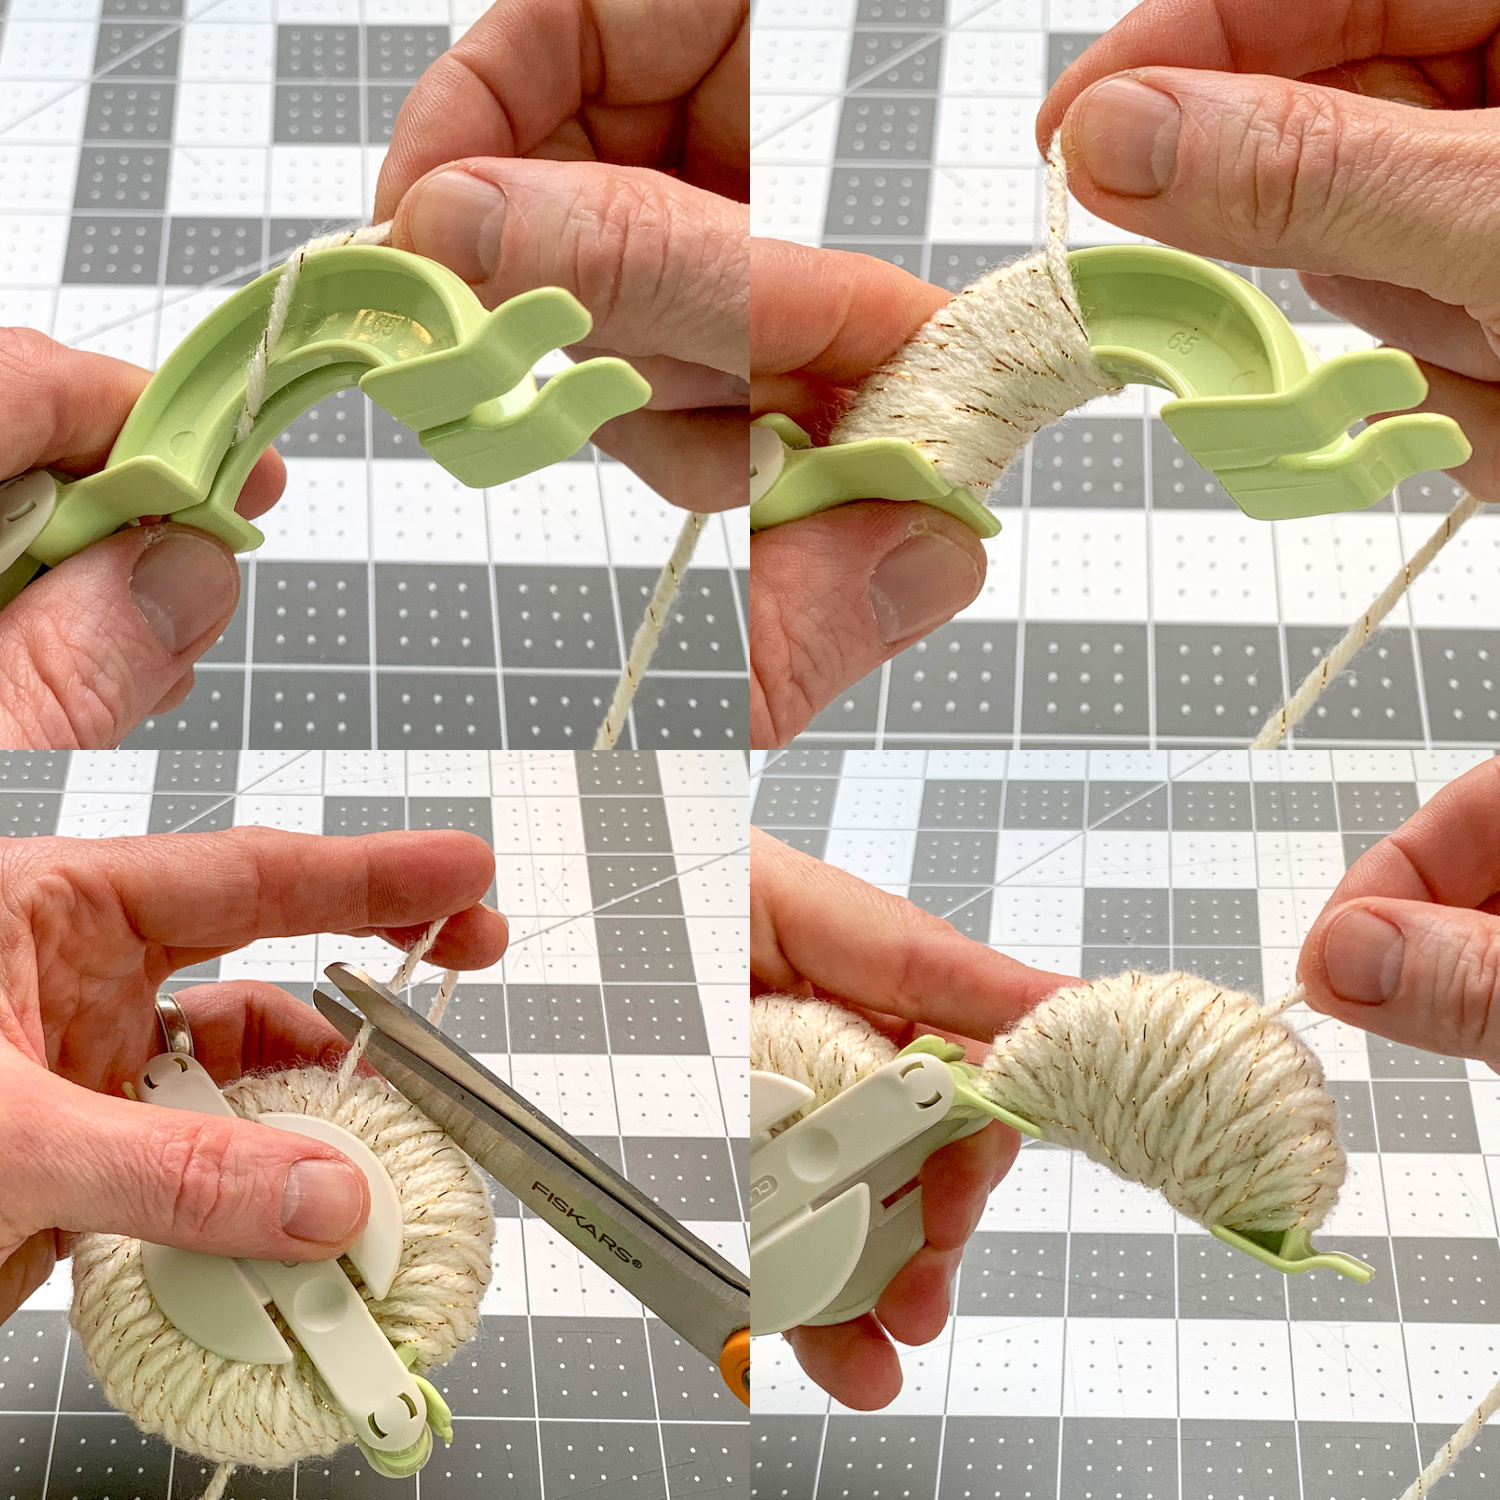 Wrapping yarn on a pom pom maker and trimming with scissors